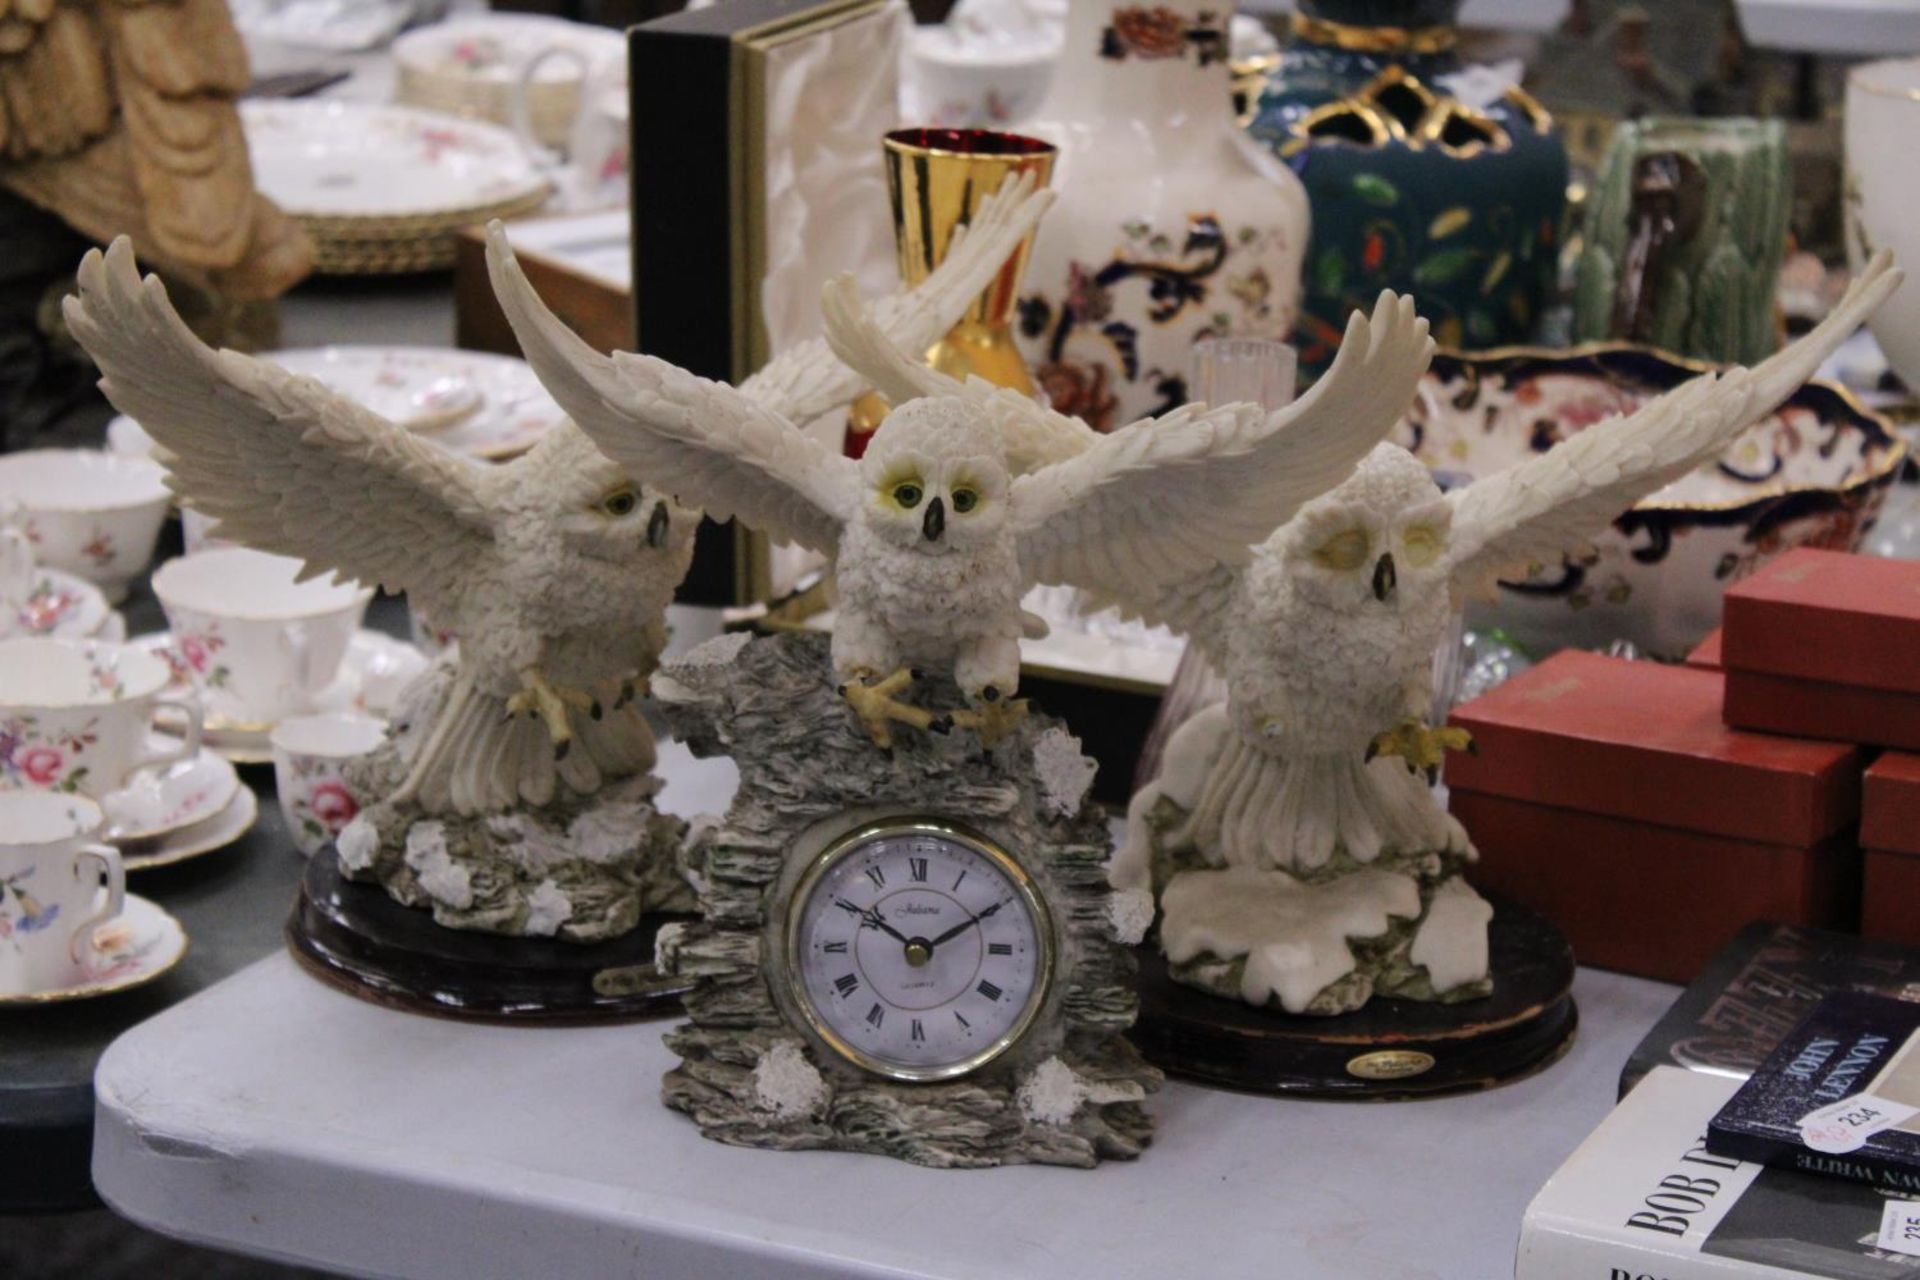 THREE LARGE RESIN 'JULIANA' MODELS OF OWLS TO INCLUDE A CLOCK